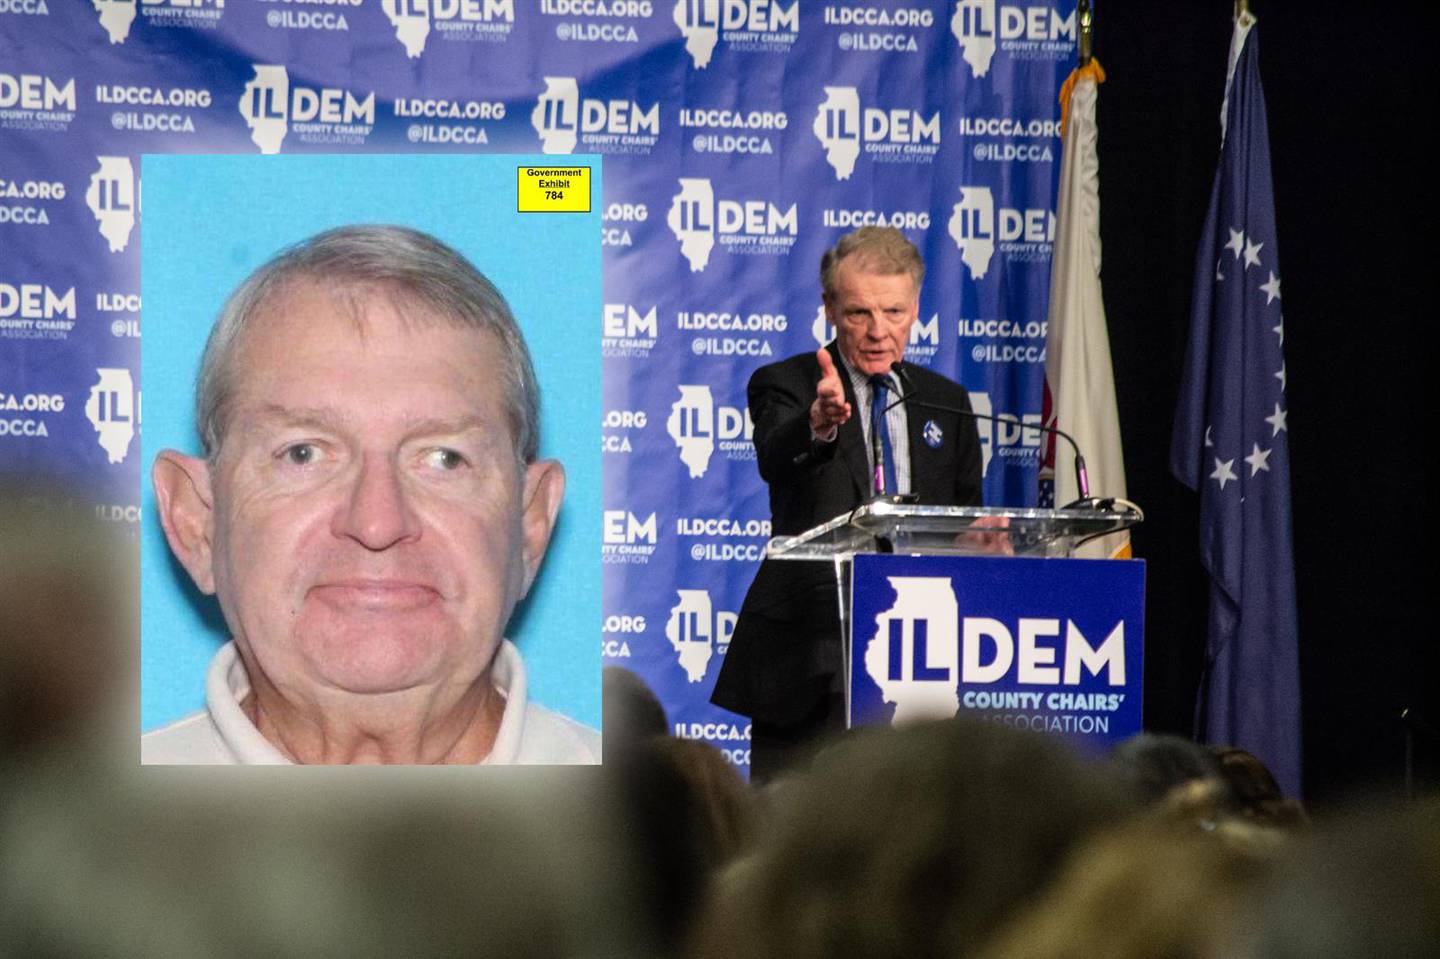 Ex-lobbyist Mike McClain is pictured in his driver's license photo, which was submitted as evidence in his federal court trial this week in a case where he and three others allegedly bribed former House Speaker Michael Madigan (right) with jobs and contracts for the speaker’s political allies in exchange for legislation favorable to electric utility Commonwealth Edison. Madigan photo and illustration by Jerry Nowicki; McClain photo obtained from trial exhibit